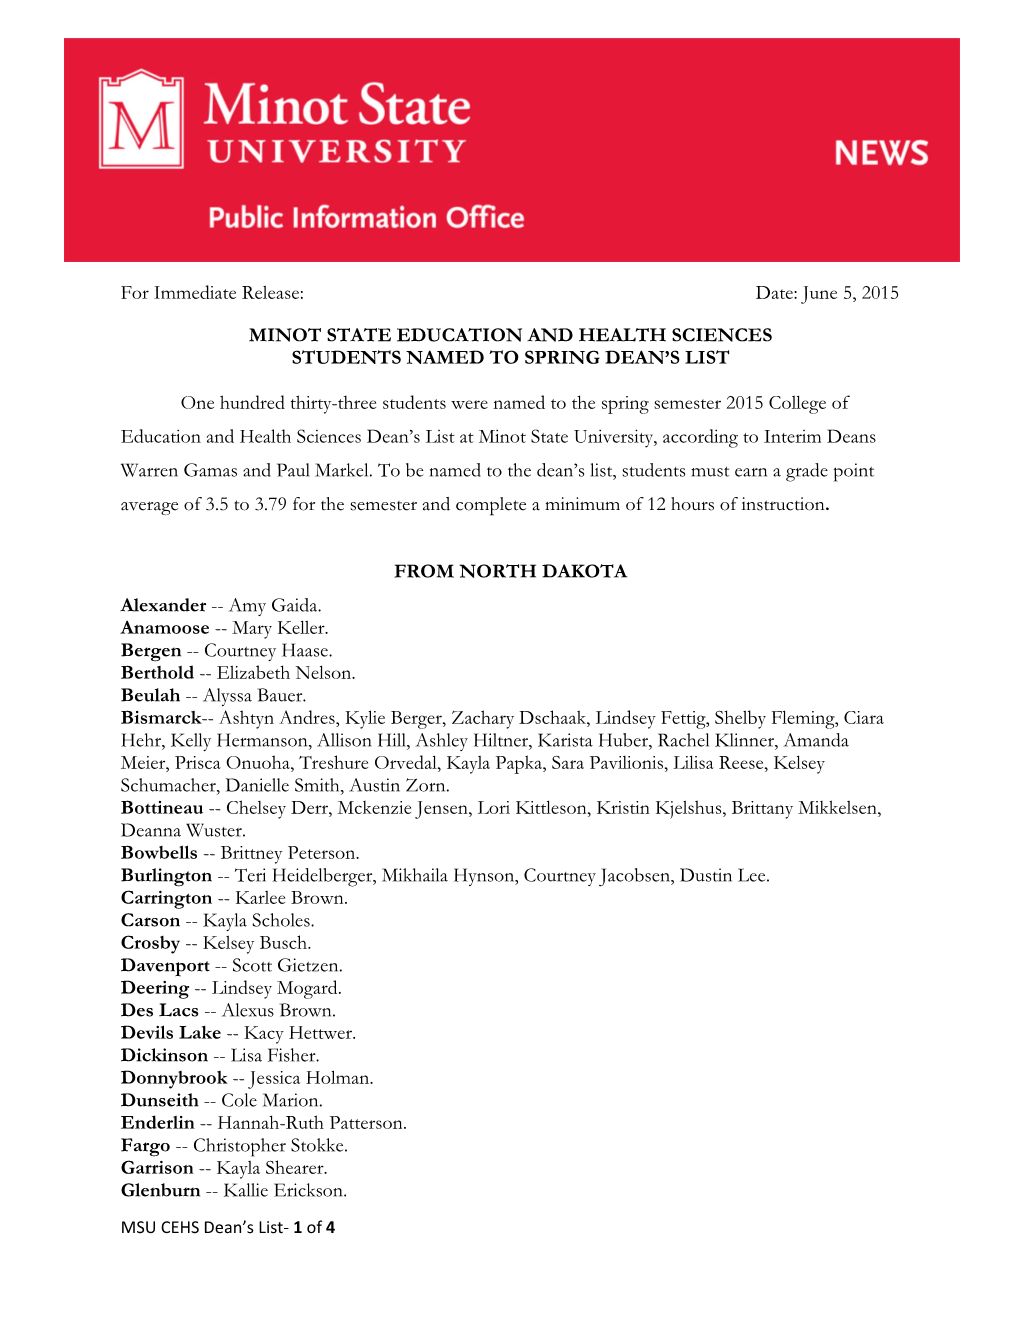 College of Education and Health Sciences Dean’S List at Minot State University, According to Interim Deans Warren Gamas and Paul Markel